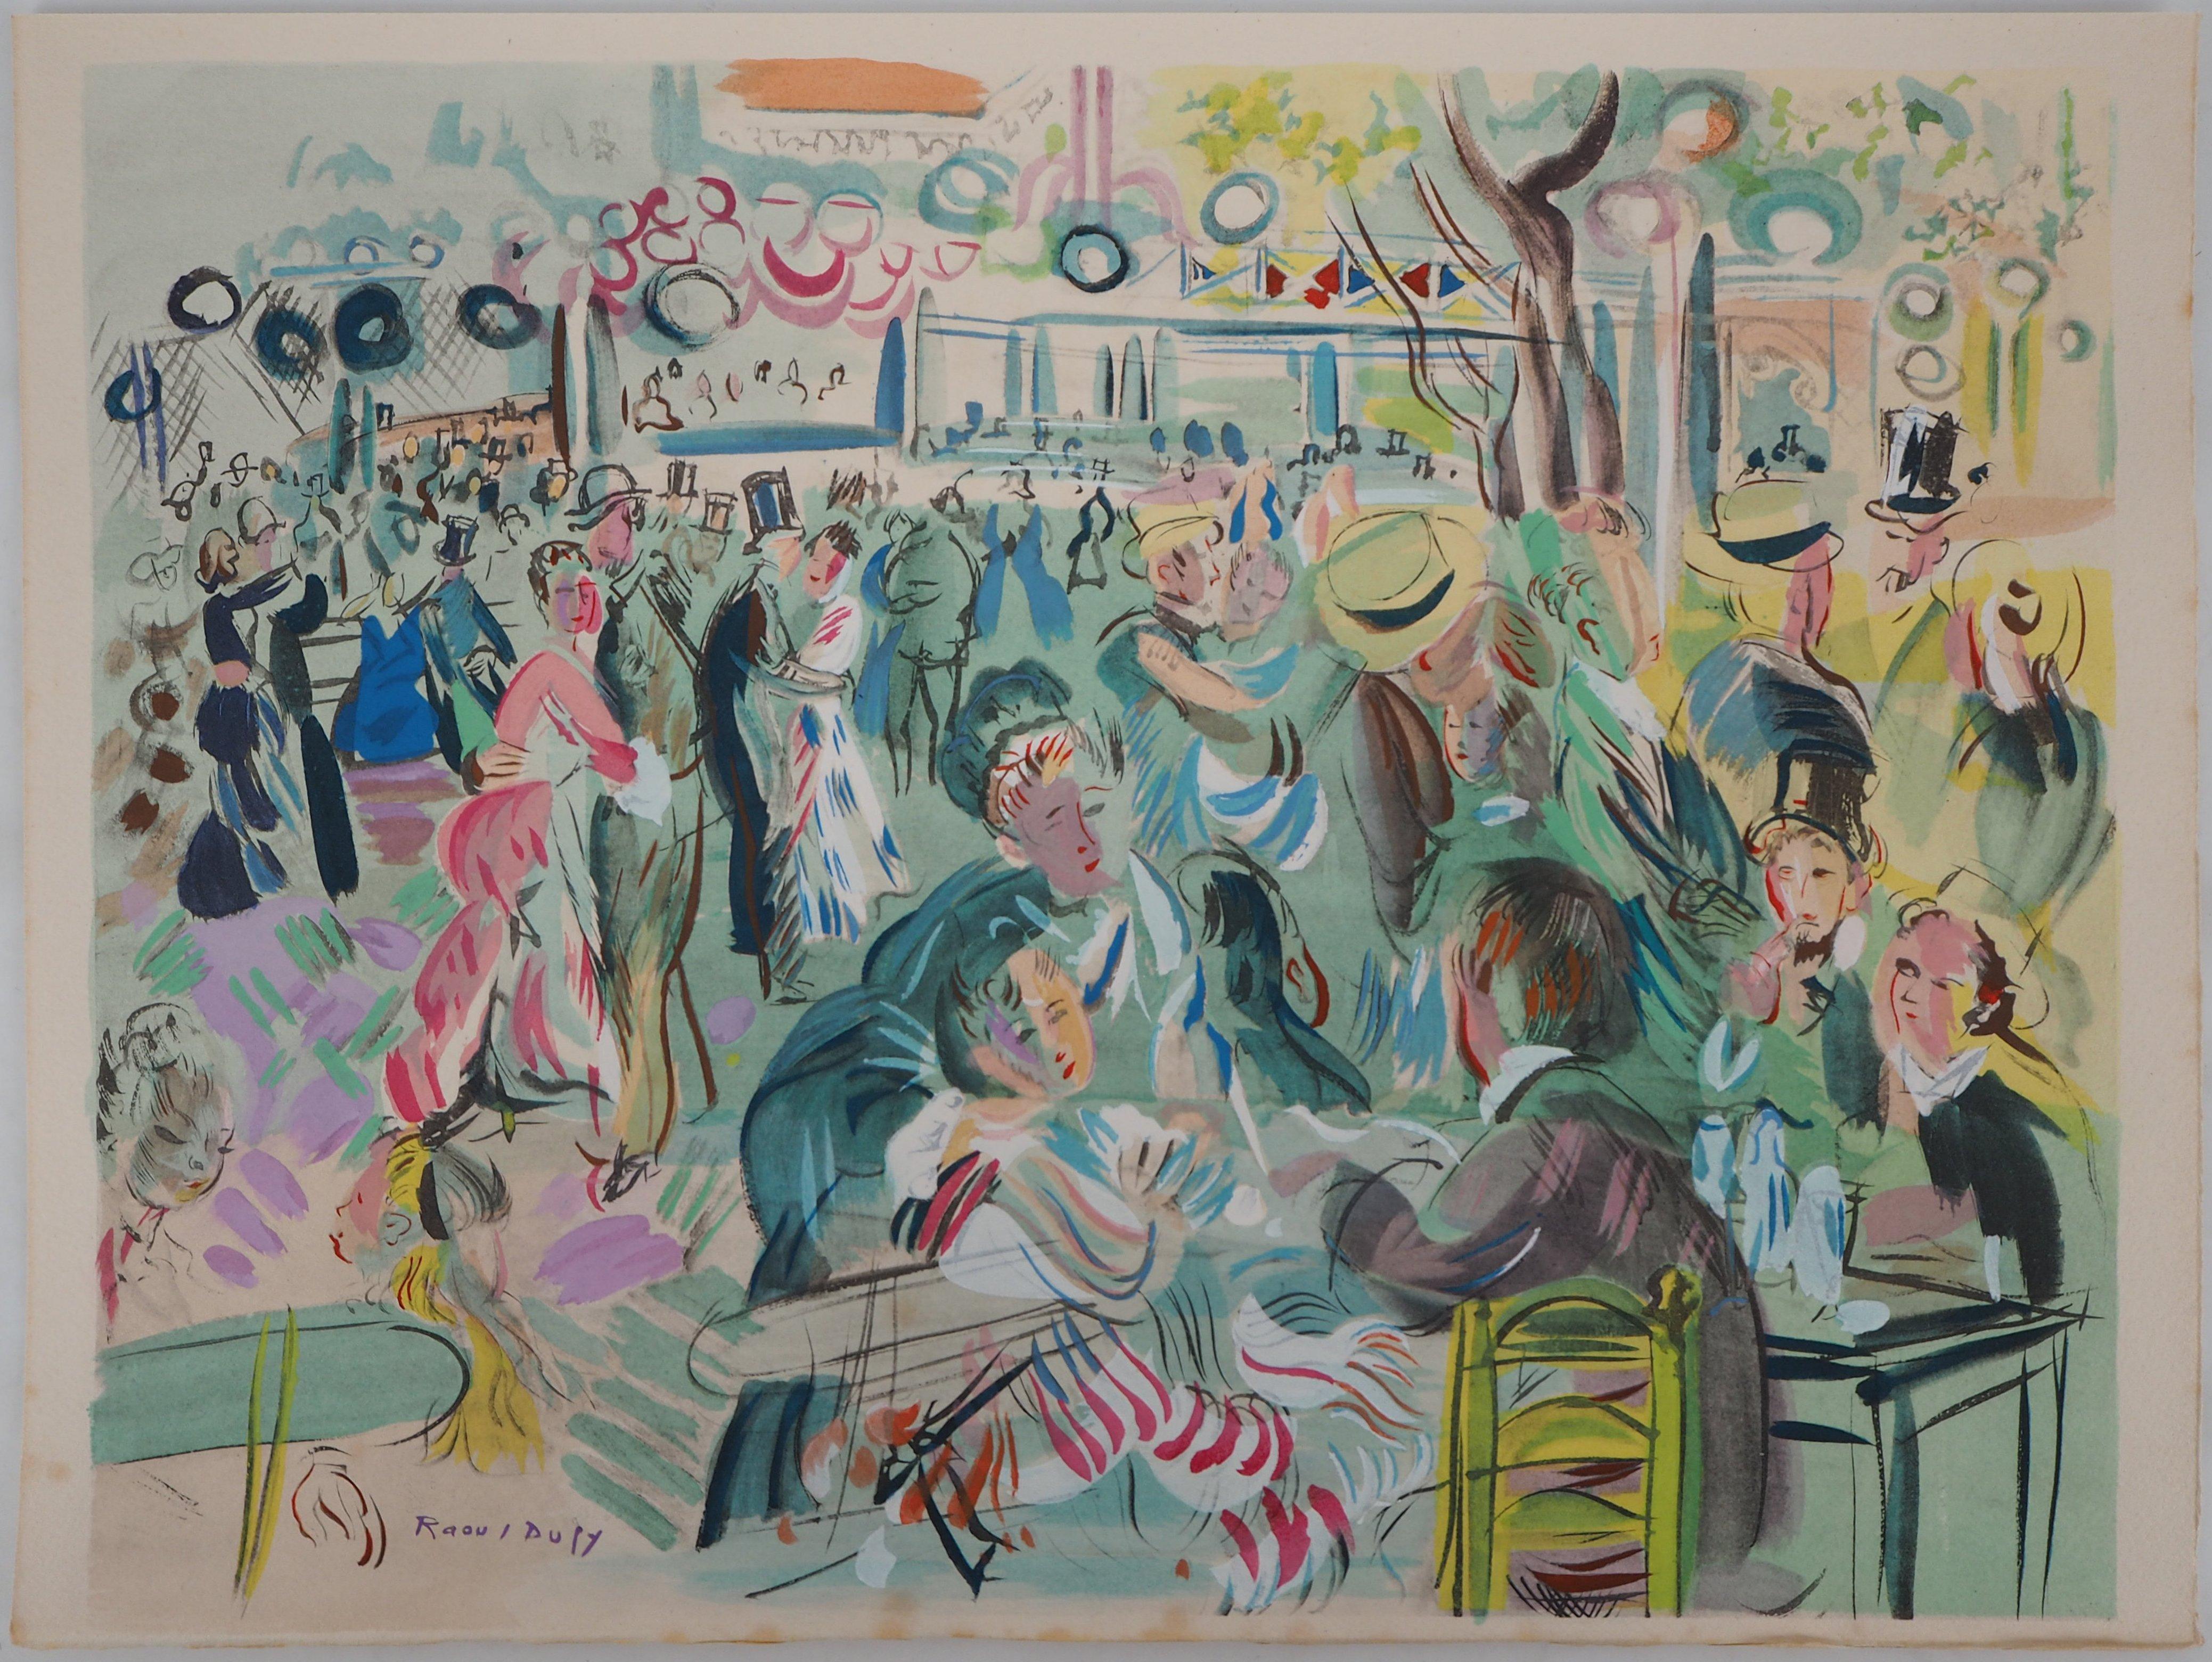 Tribute to Renoir : Dancing Cafe - Original Lithograph - Print by Raoul Dufy